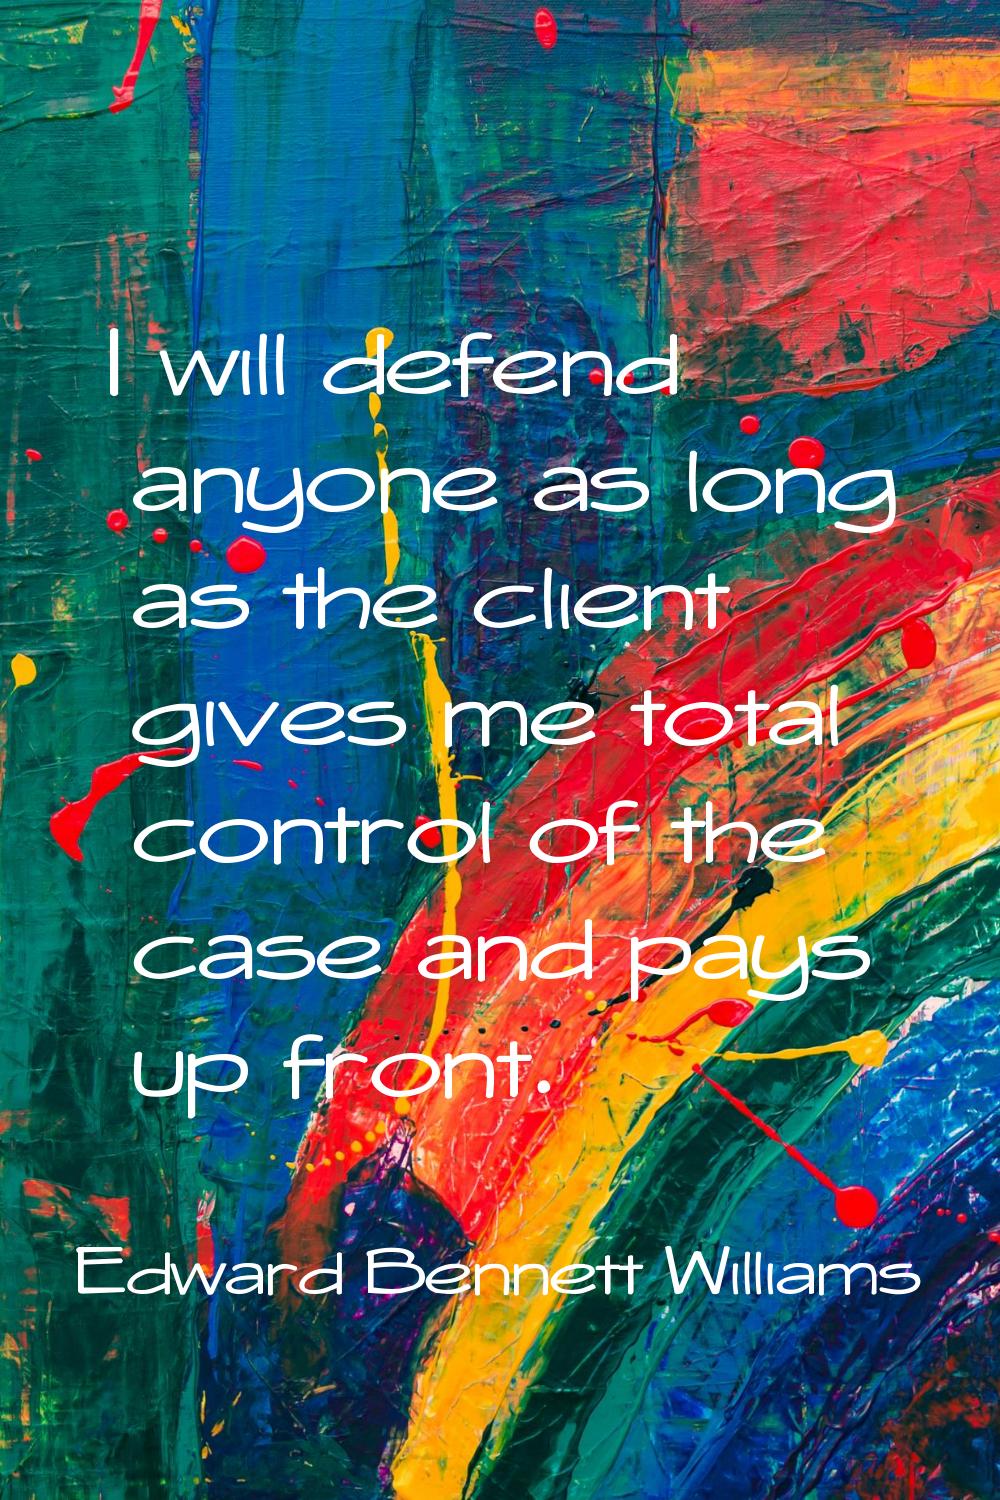 I will defend anyone as long as the client gives me total control of the case and pays up front.